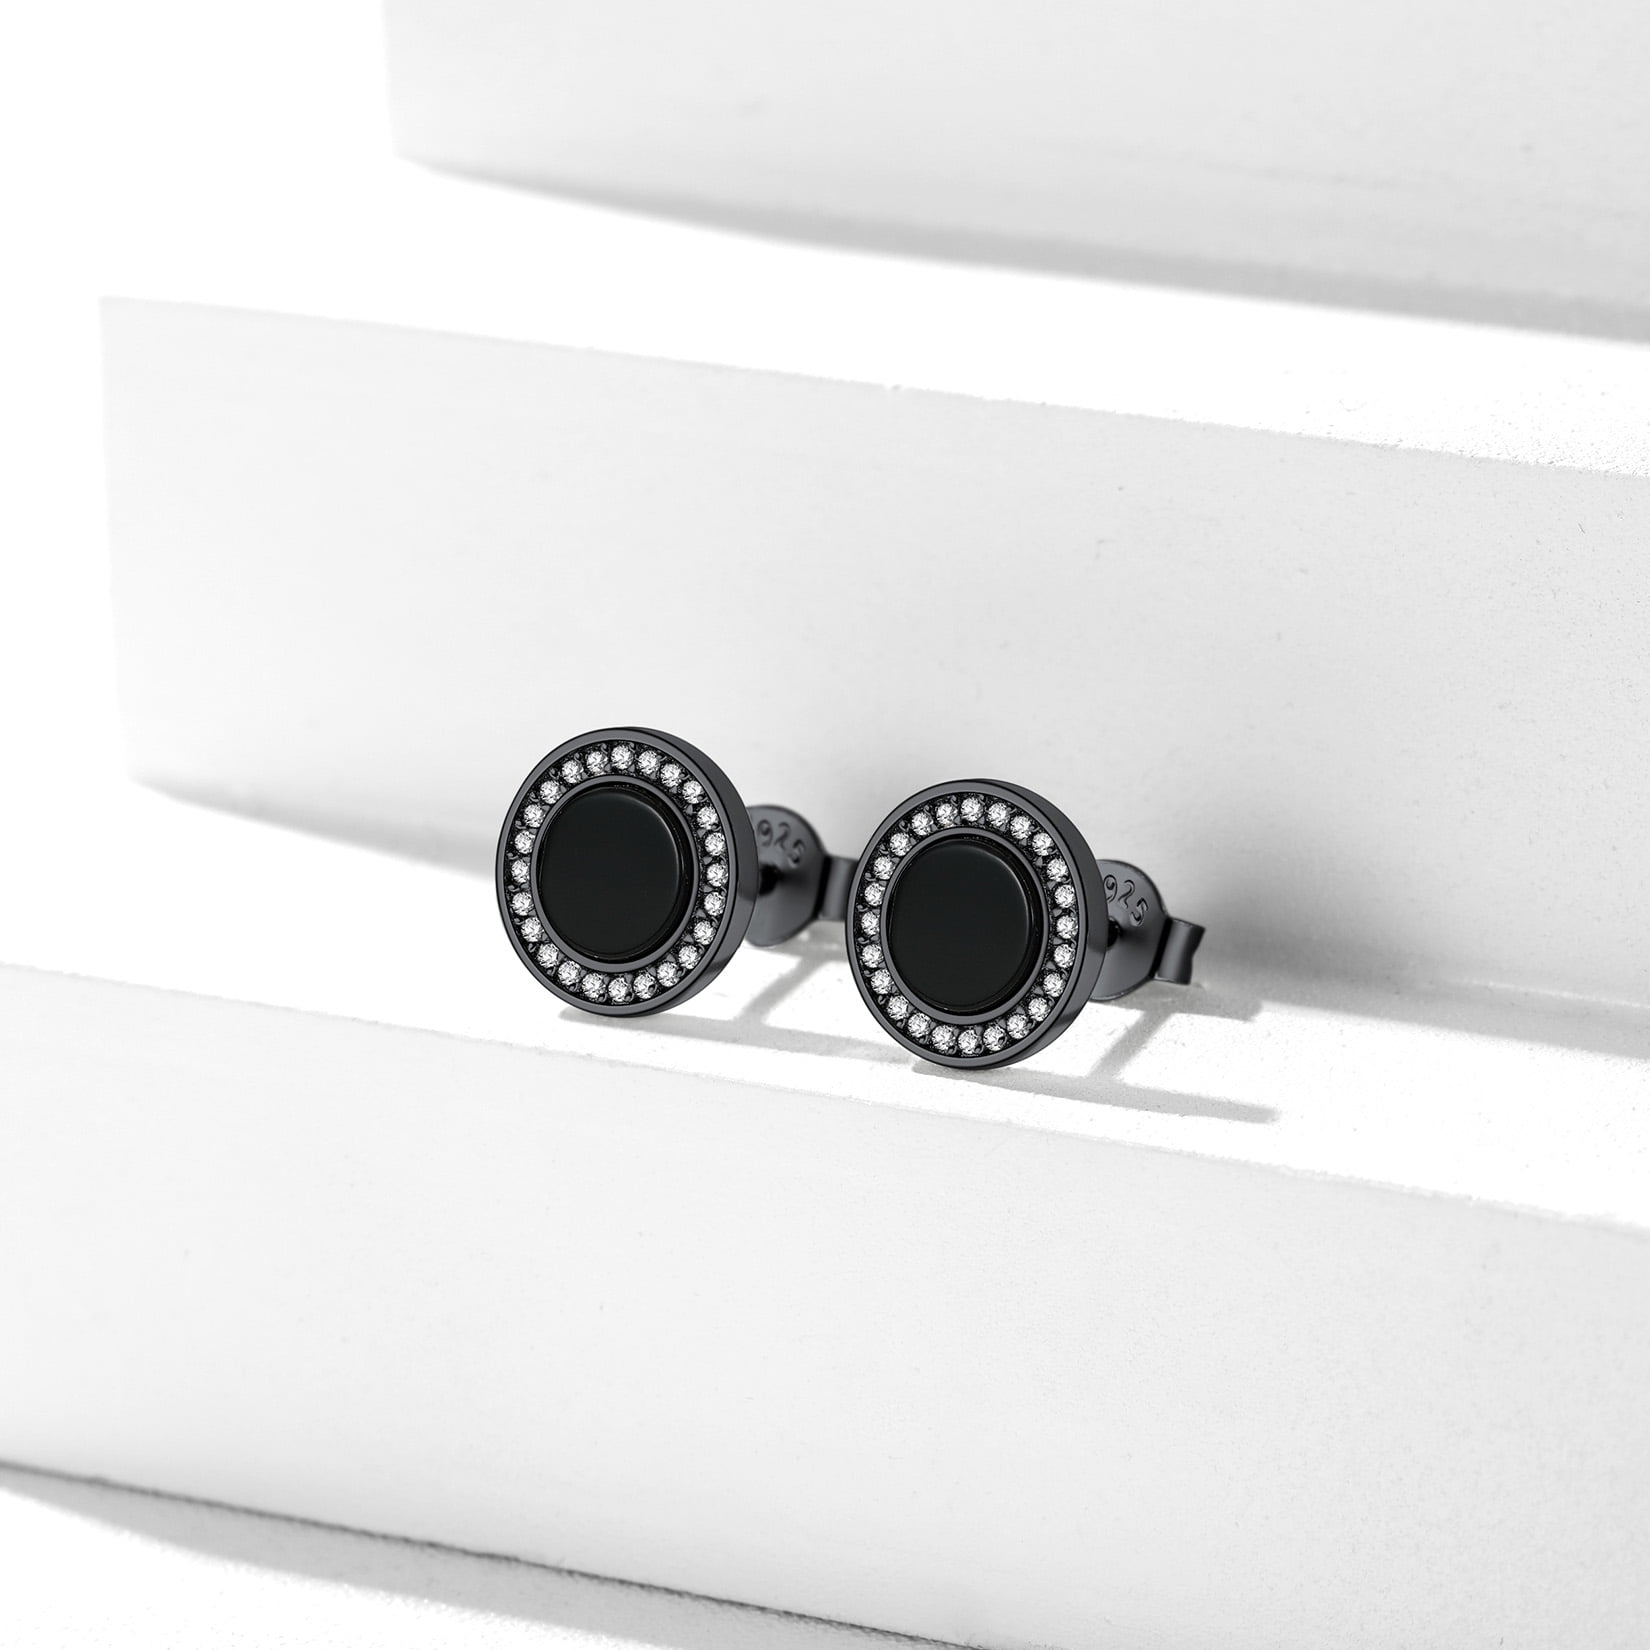 10 Mm Record Post Earrings Vinyl Record Black Stud Earrings Flat Ear Studs  Unisex Studs Unisex Earrings Upcycled Jewelry Hipster Earrings 